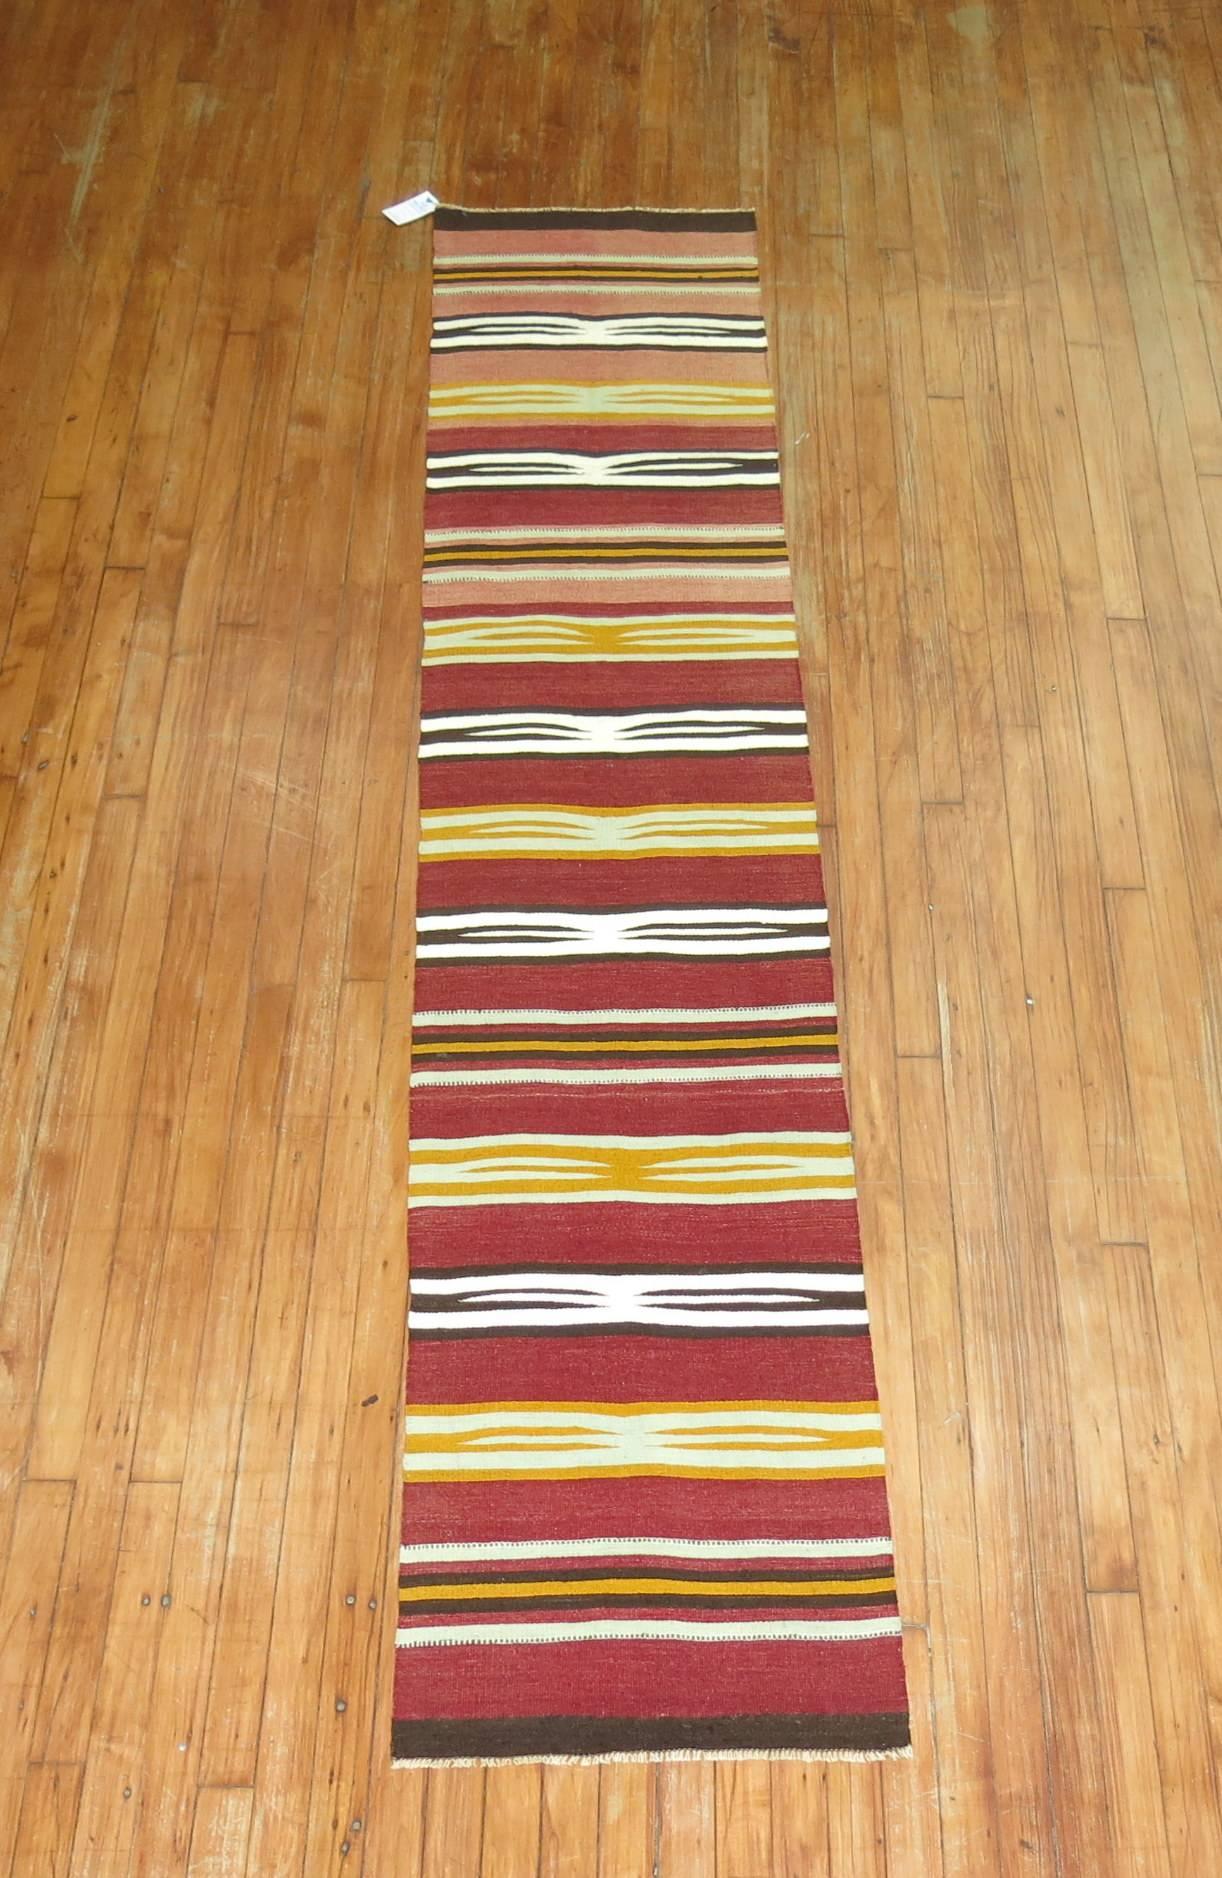 One of a kind Vintage Turkish Kilim runner from the middle of the 20th century

1'9'' x 8'6''